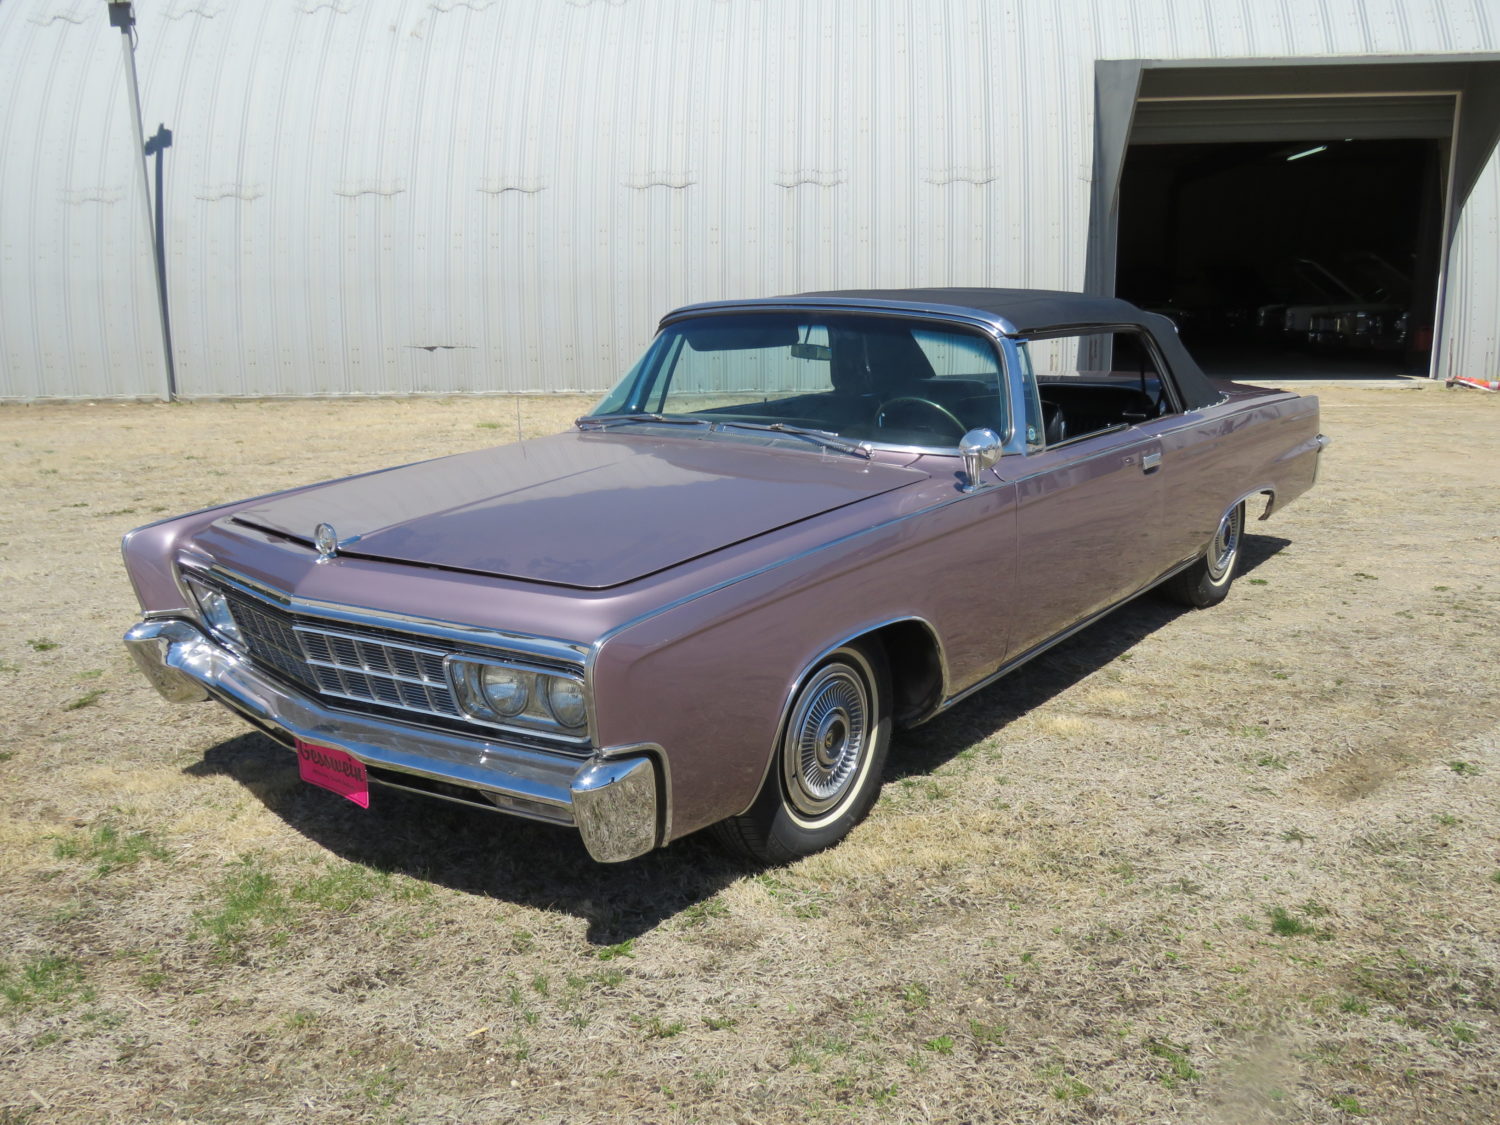 MOPAR Collector Cars- The Jim Gesswein Classic Car Collection Auction- LIVE Onsite Auction with Online Bidding - image 17